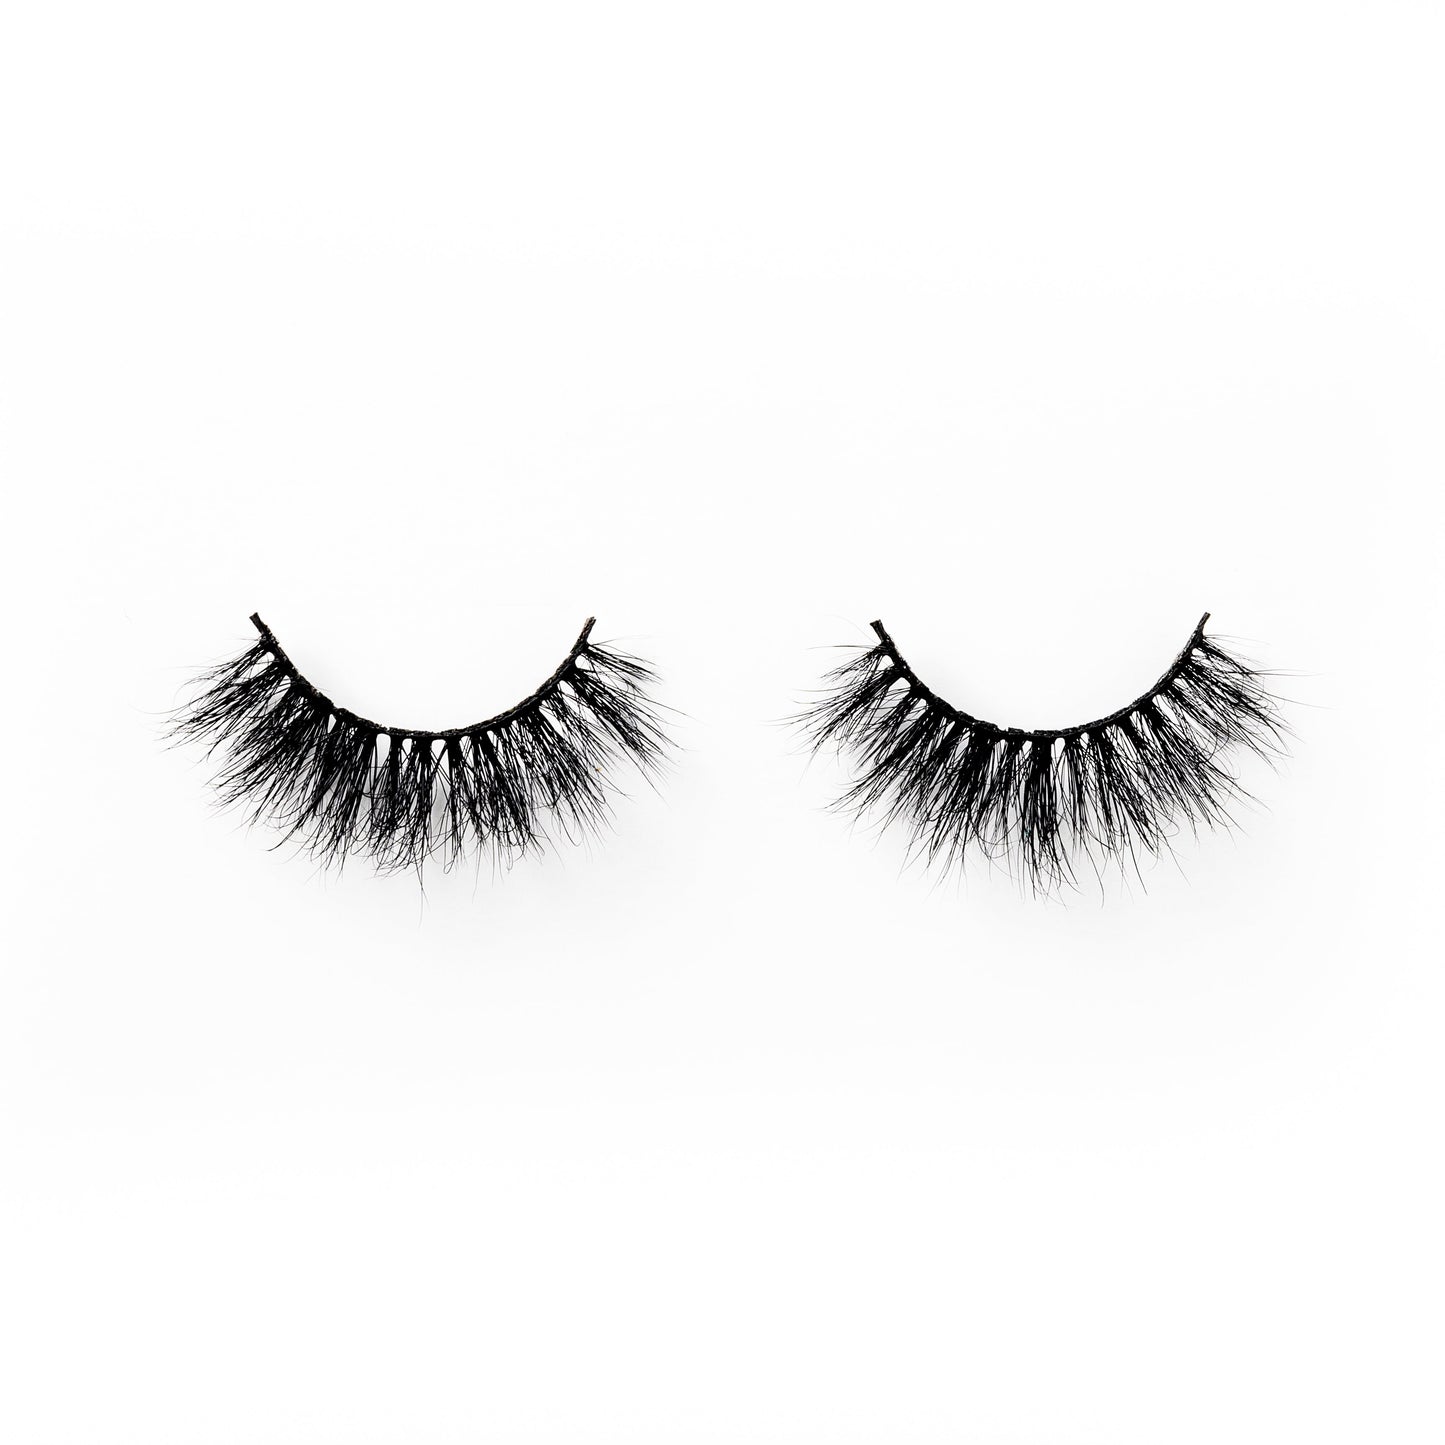 Reign Lashes | Gypsy | Glue on 3D Luxury Mink Lashes-Reign Lashes-Reign-beauty, Lashes, MakeUp, Reign, reign lashes-The Twisted Chandelier